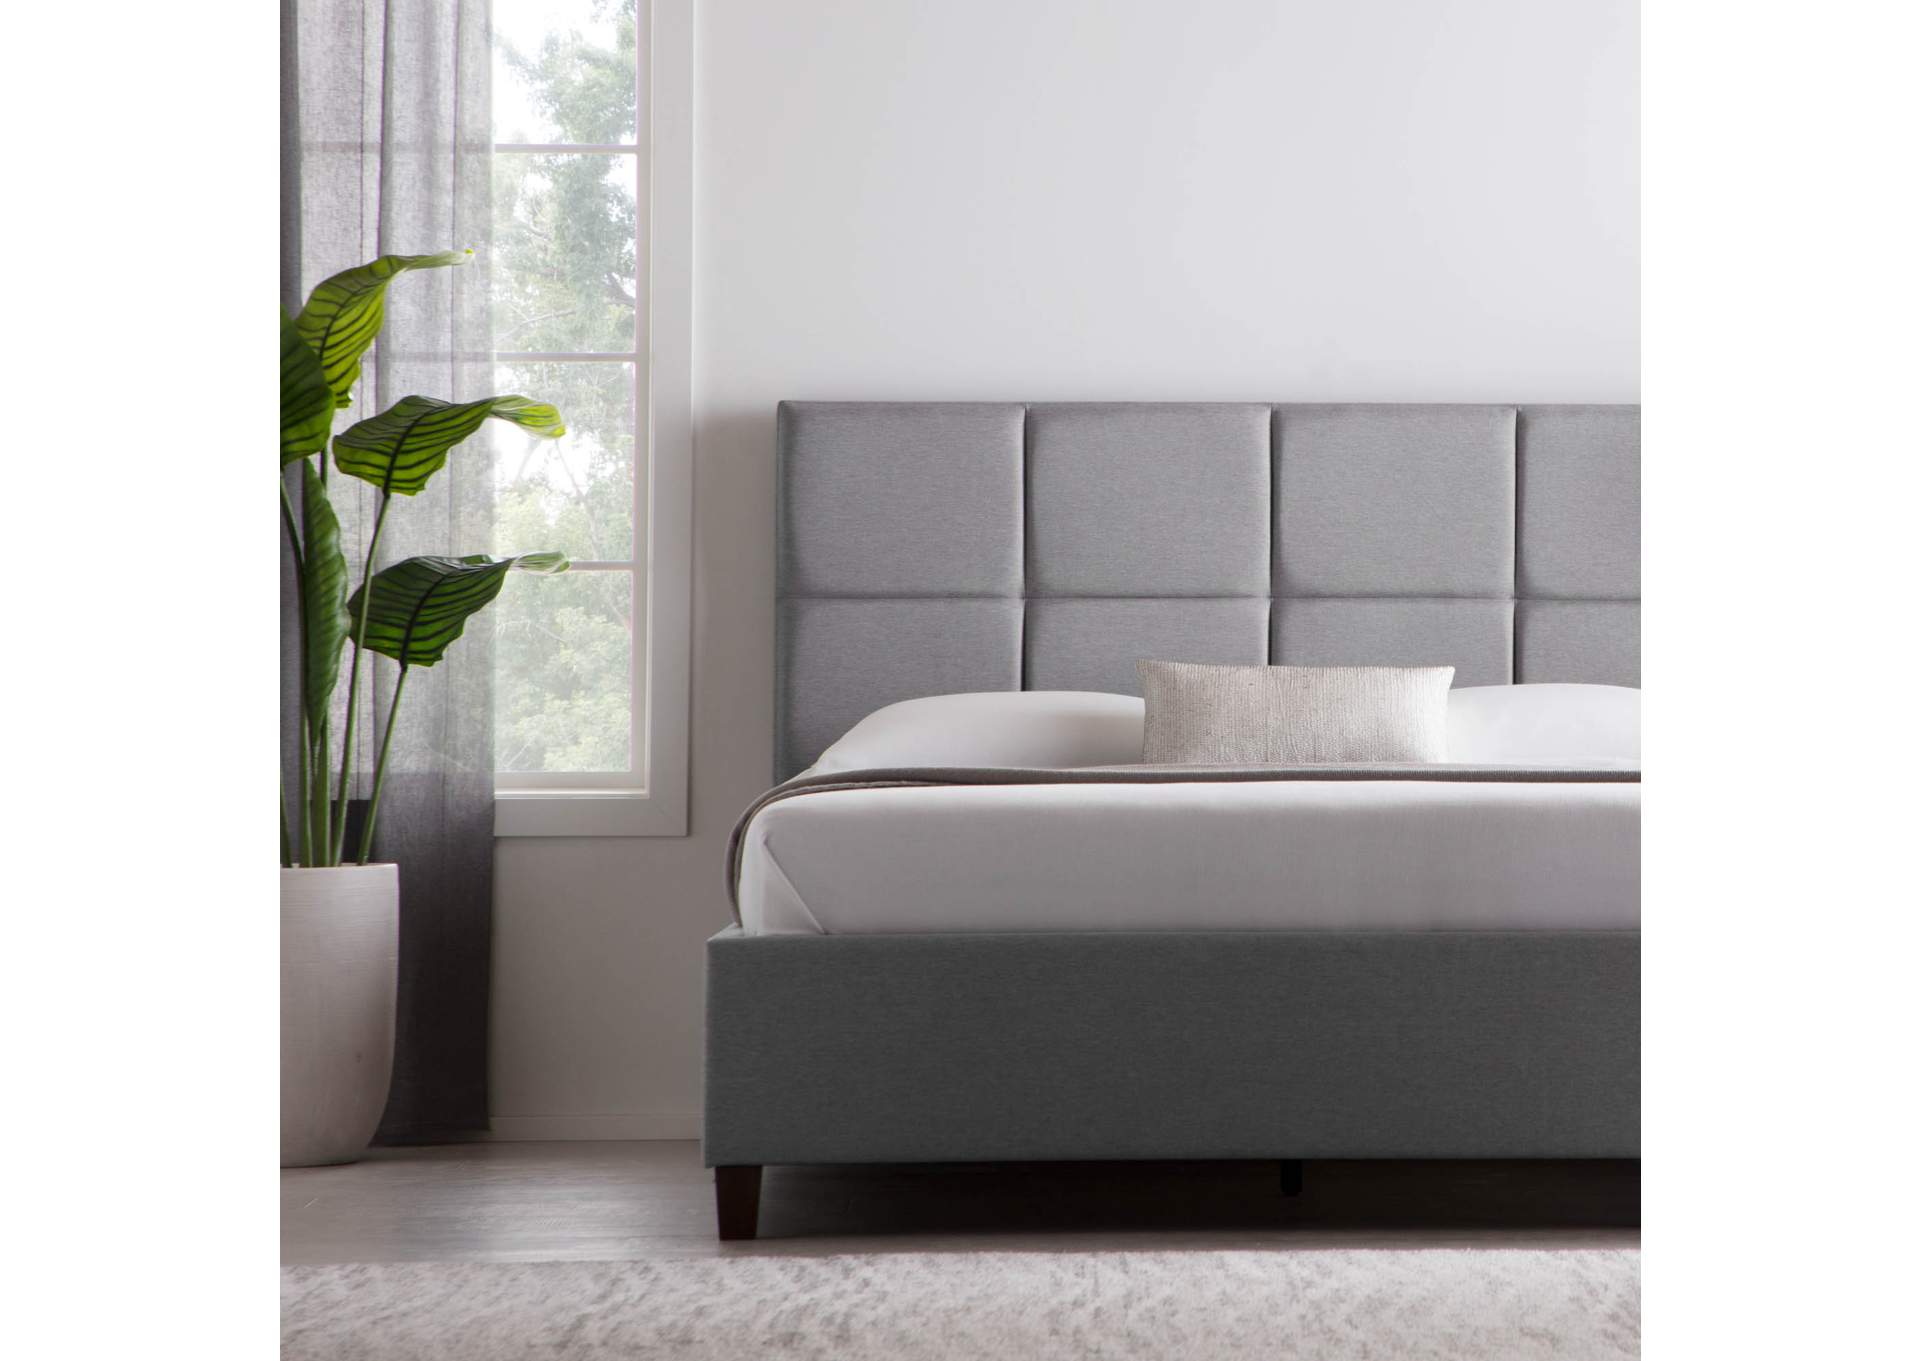 Malouf Charcoal Scoresby Upholstered California King Bed,Malouf